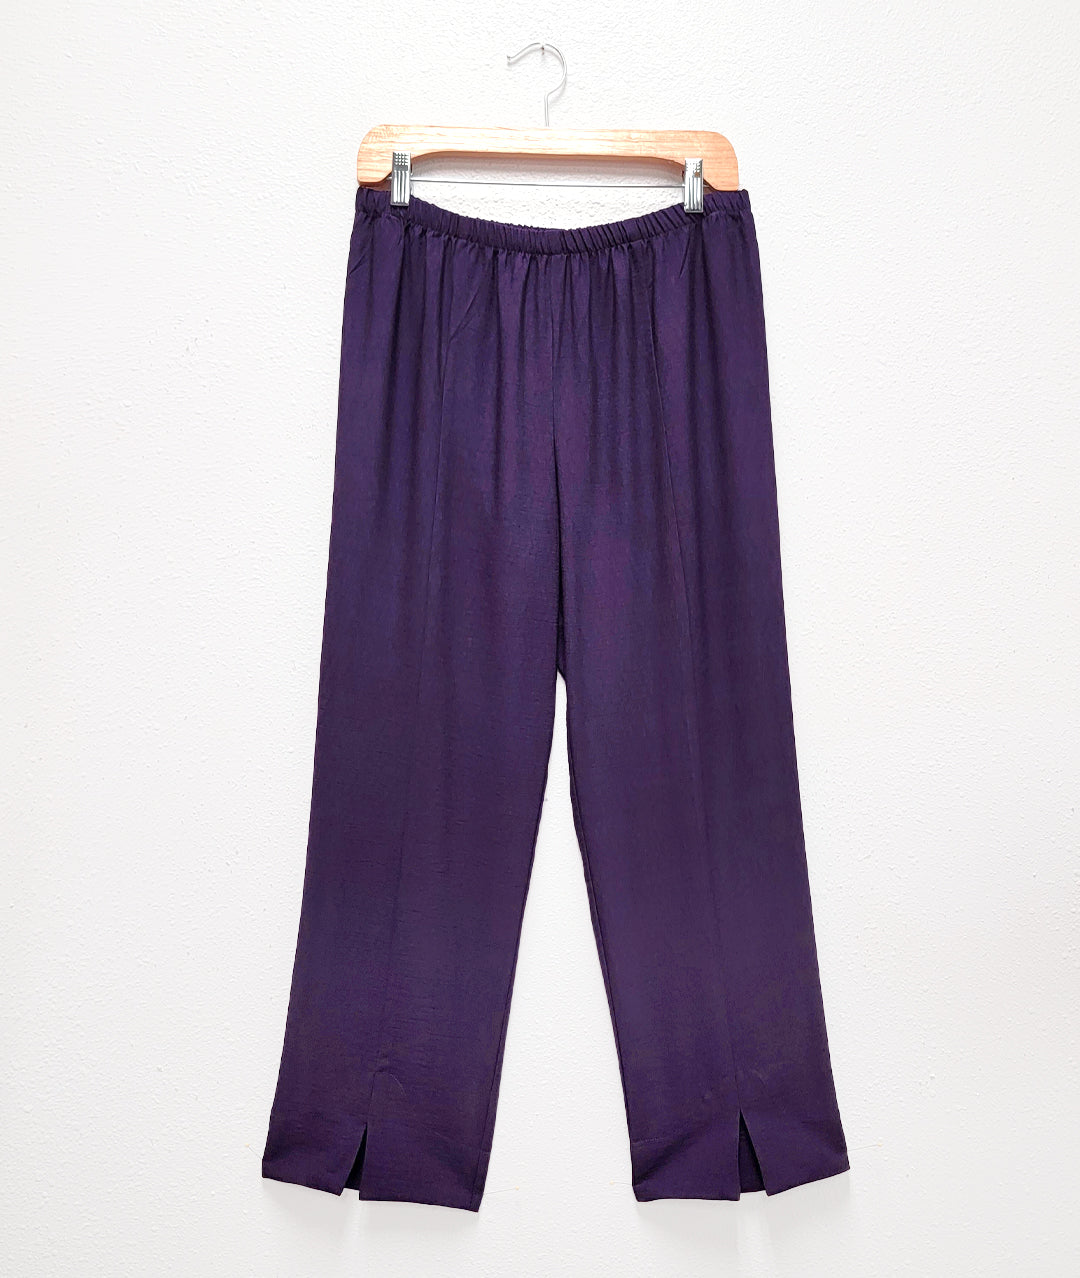 aubergine color straight leg pant with a center seam and split at each ankle